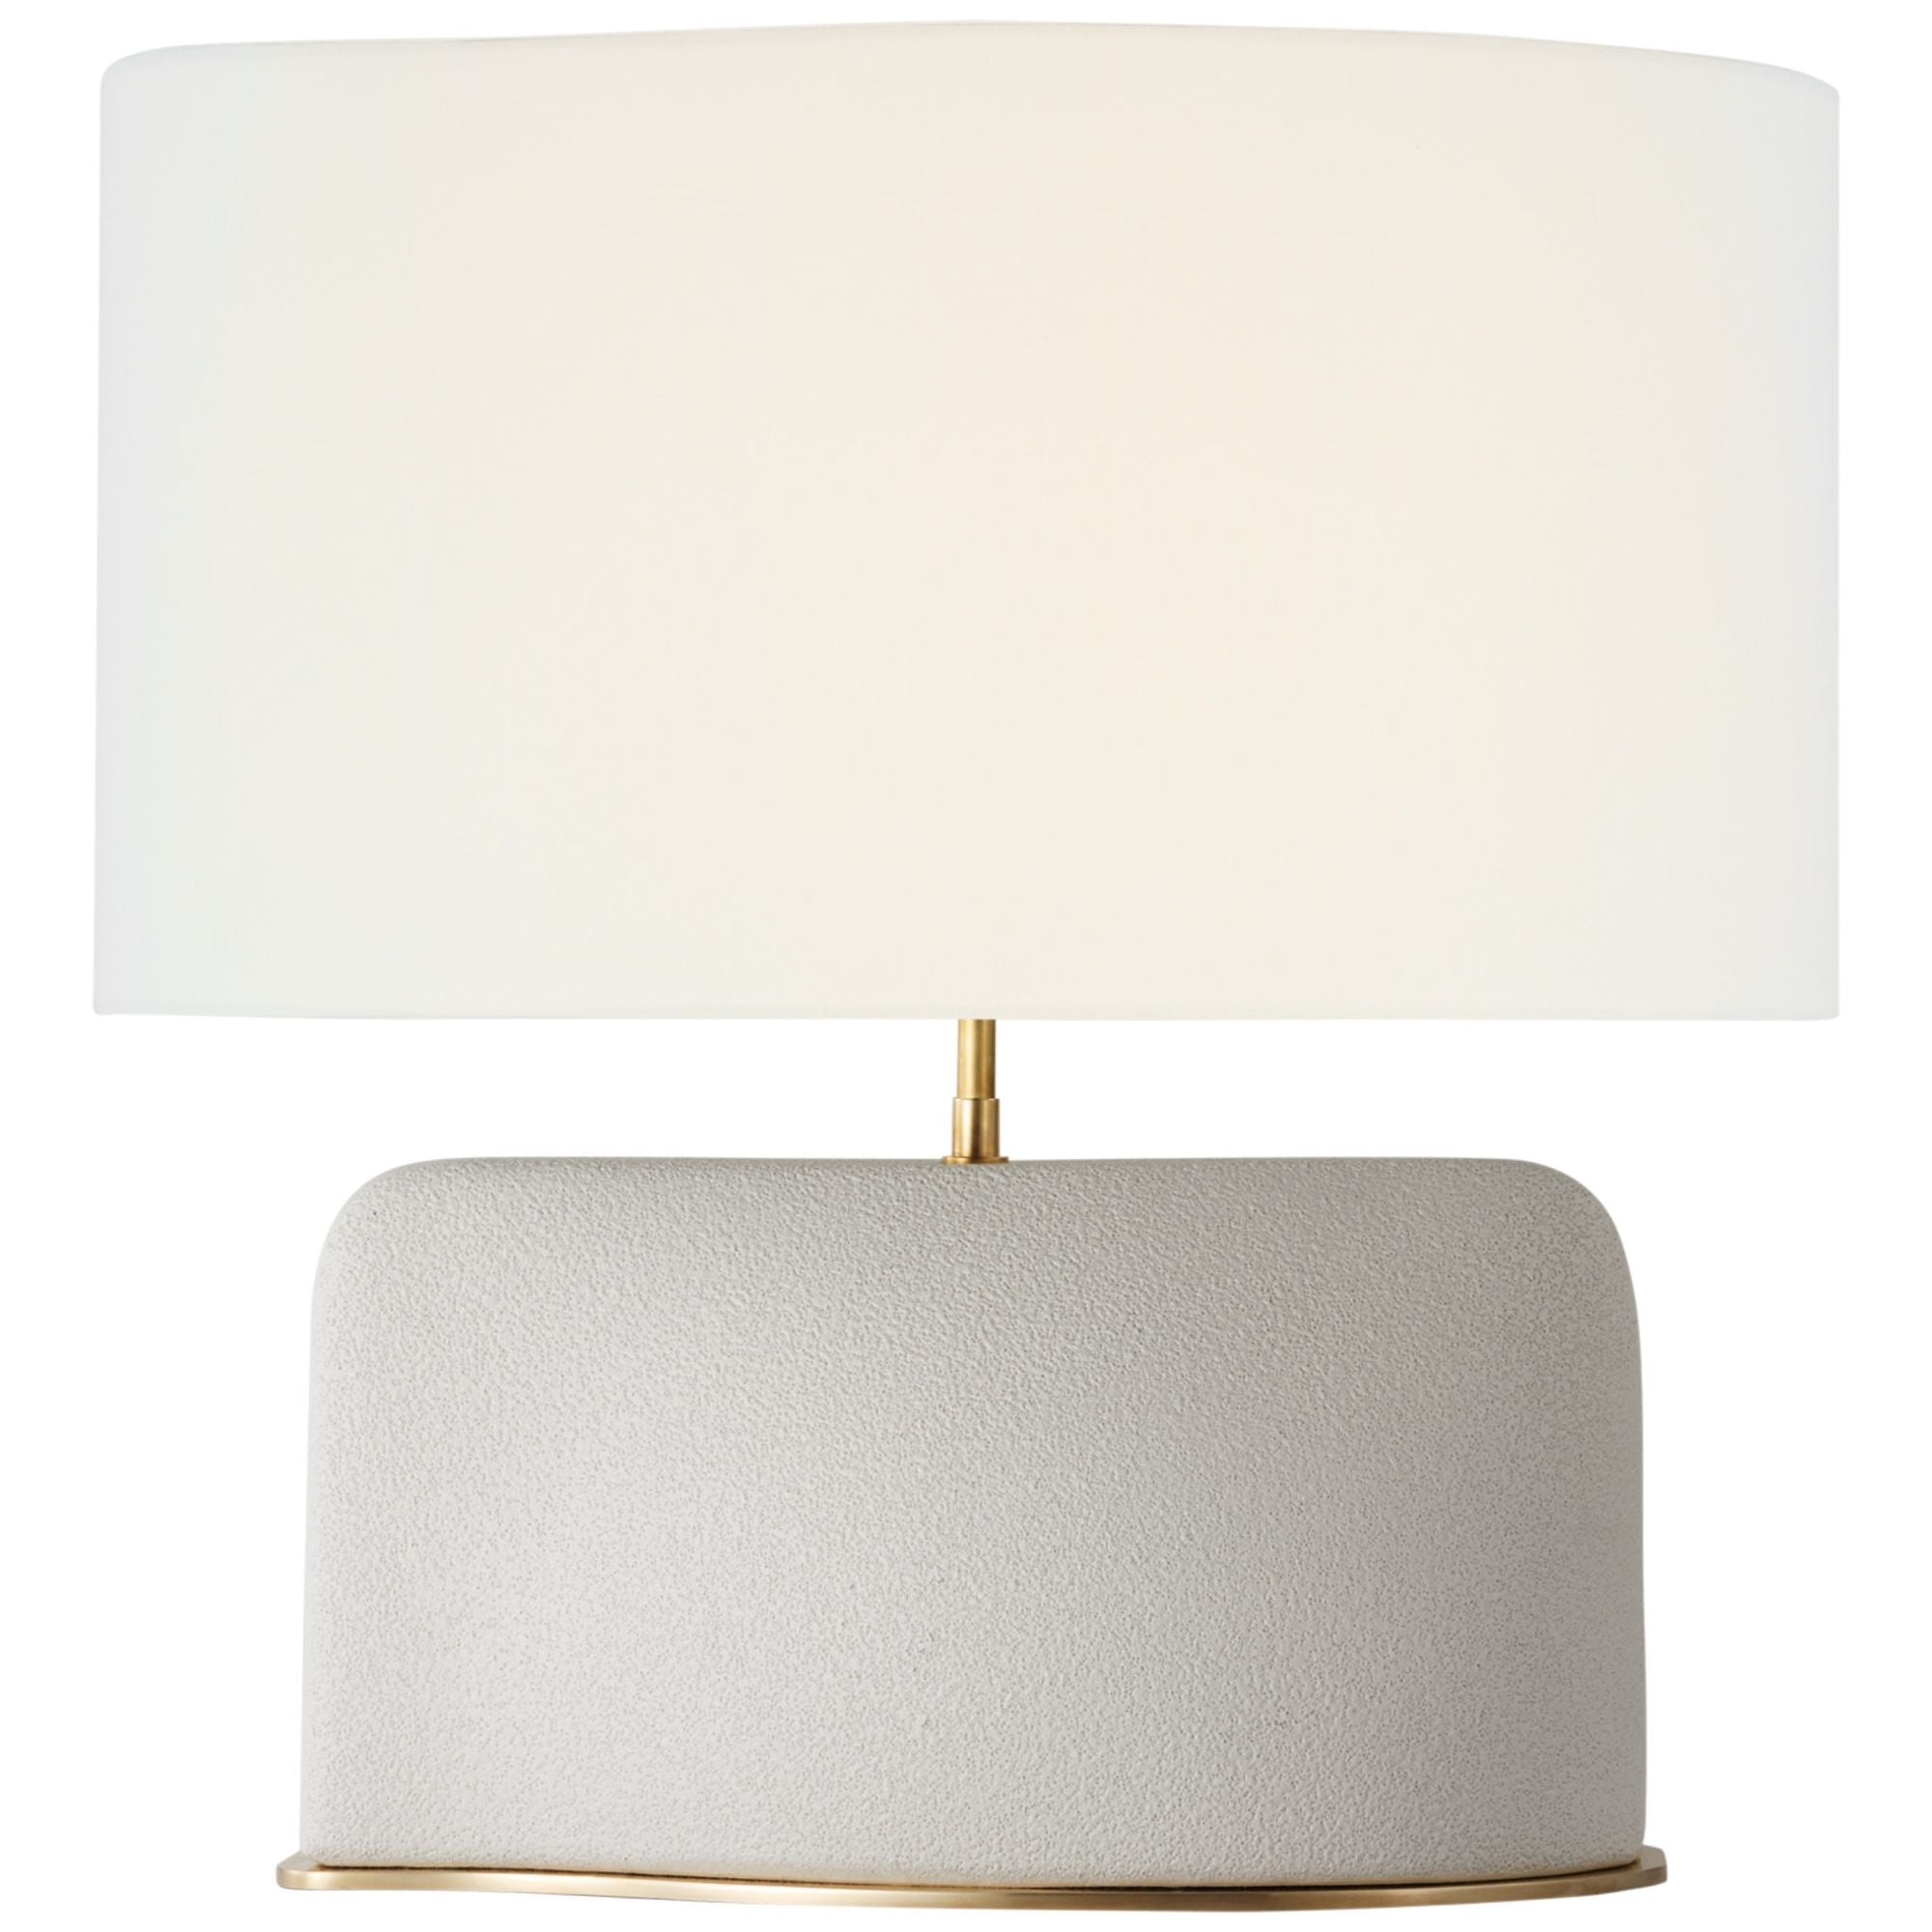 Kelly Wearstler Amantani Medium Sculpted Form Table Lamp in Porous White with Linen Shade